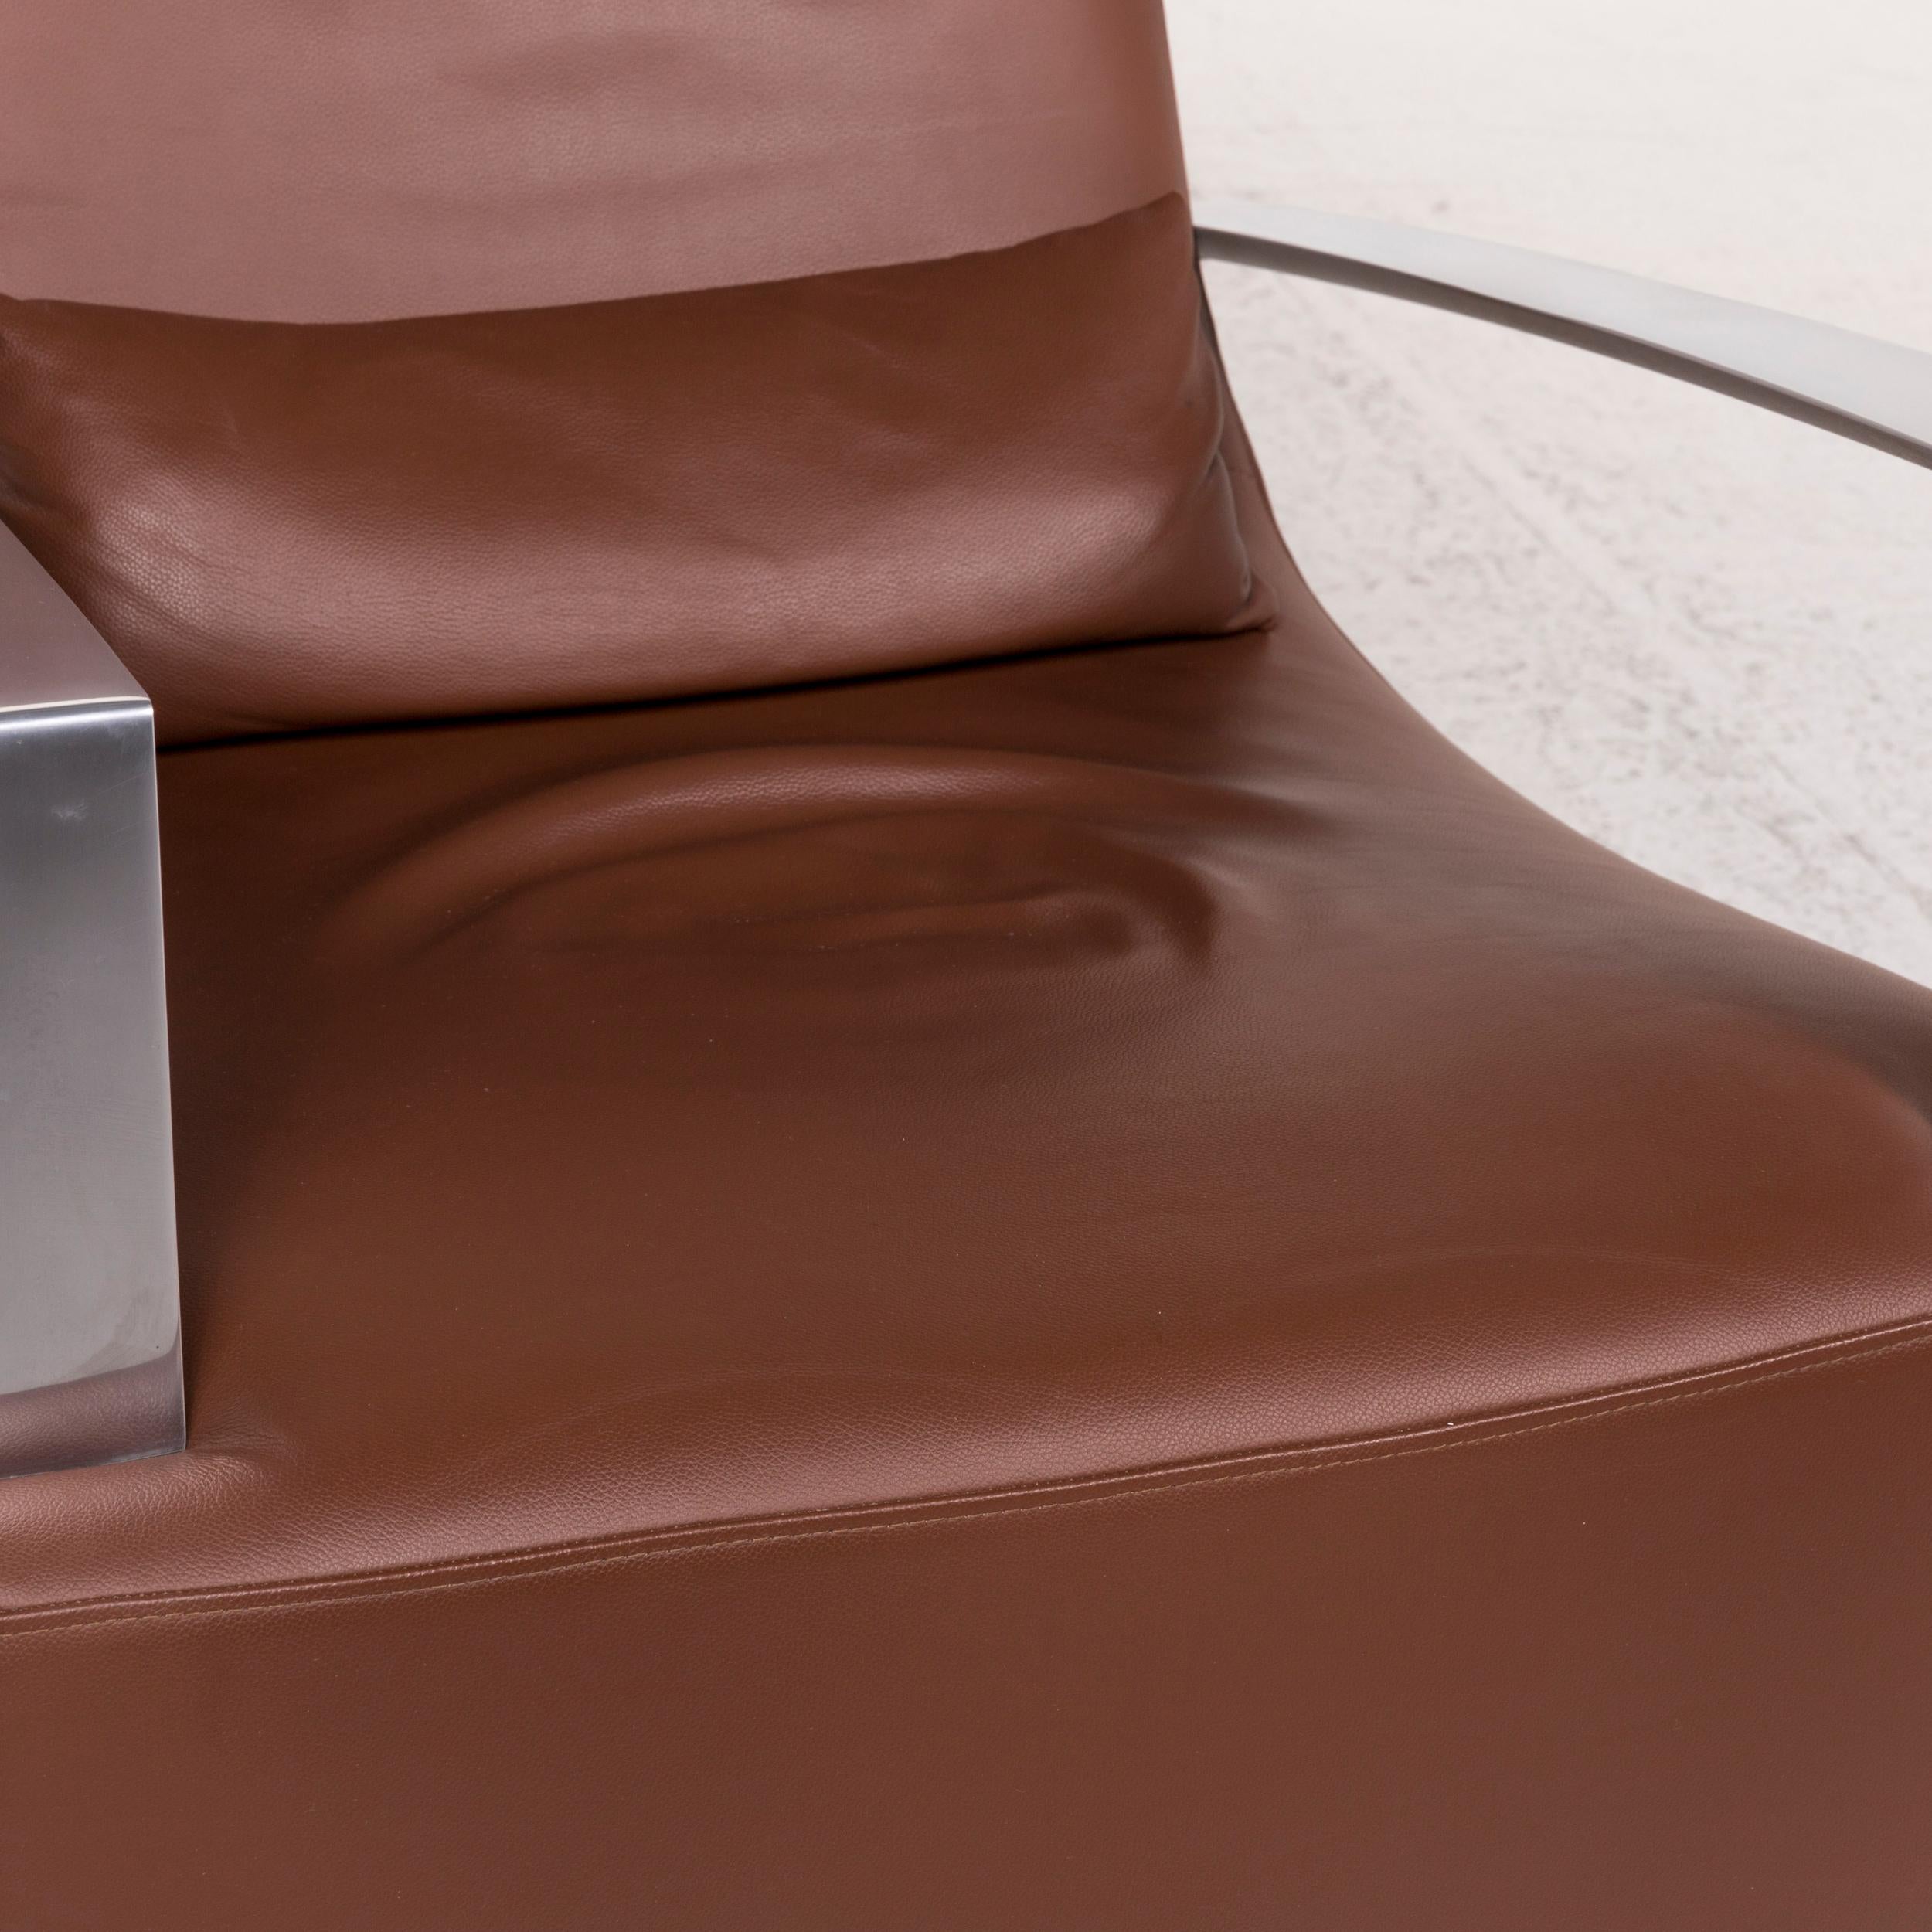 We bring to you a Ligne Roset leather armchair incl. stool brown rocking function.


 Product measurements in centimeters:
 

Depth 85
Width 72
Height 84
Seat-height 40
Rest-height 58
Seat-depth 50
Seat-width 53
Back-height 47.
 